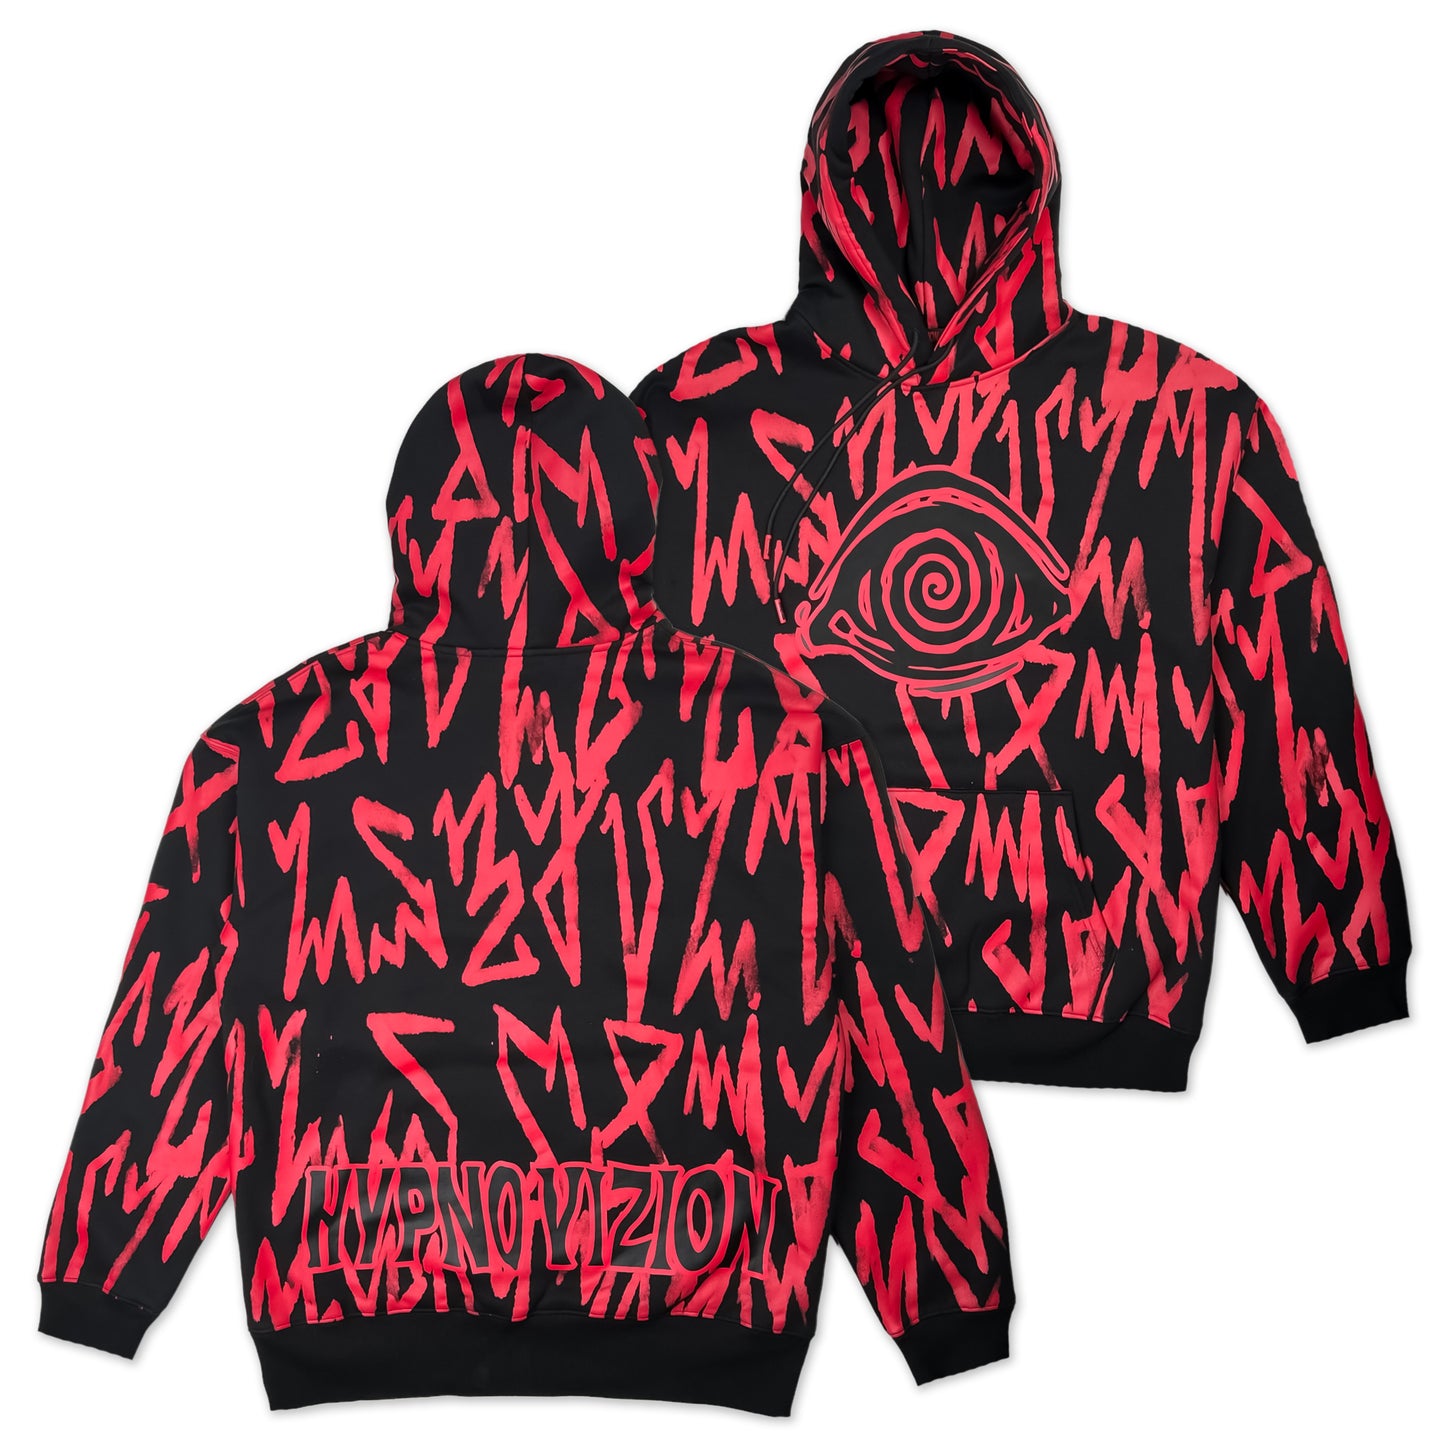 HypnoVizion - No Such Thing Pullover Hoodie